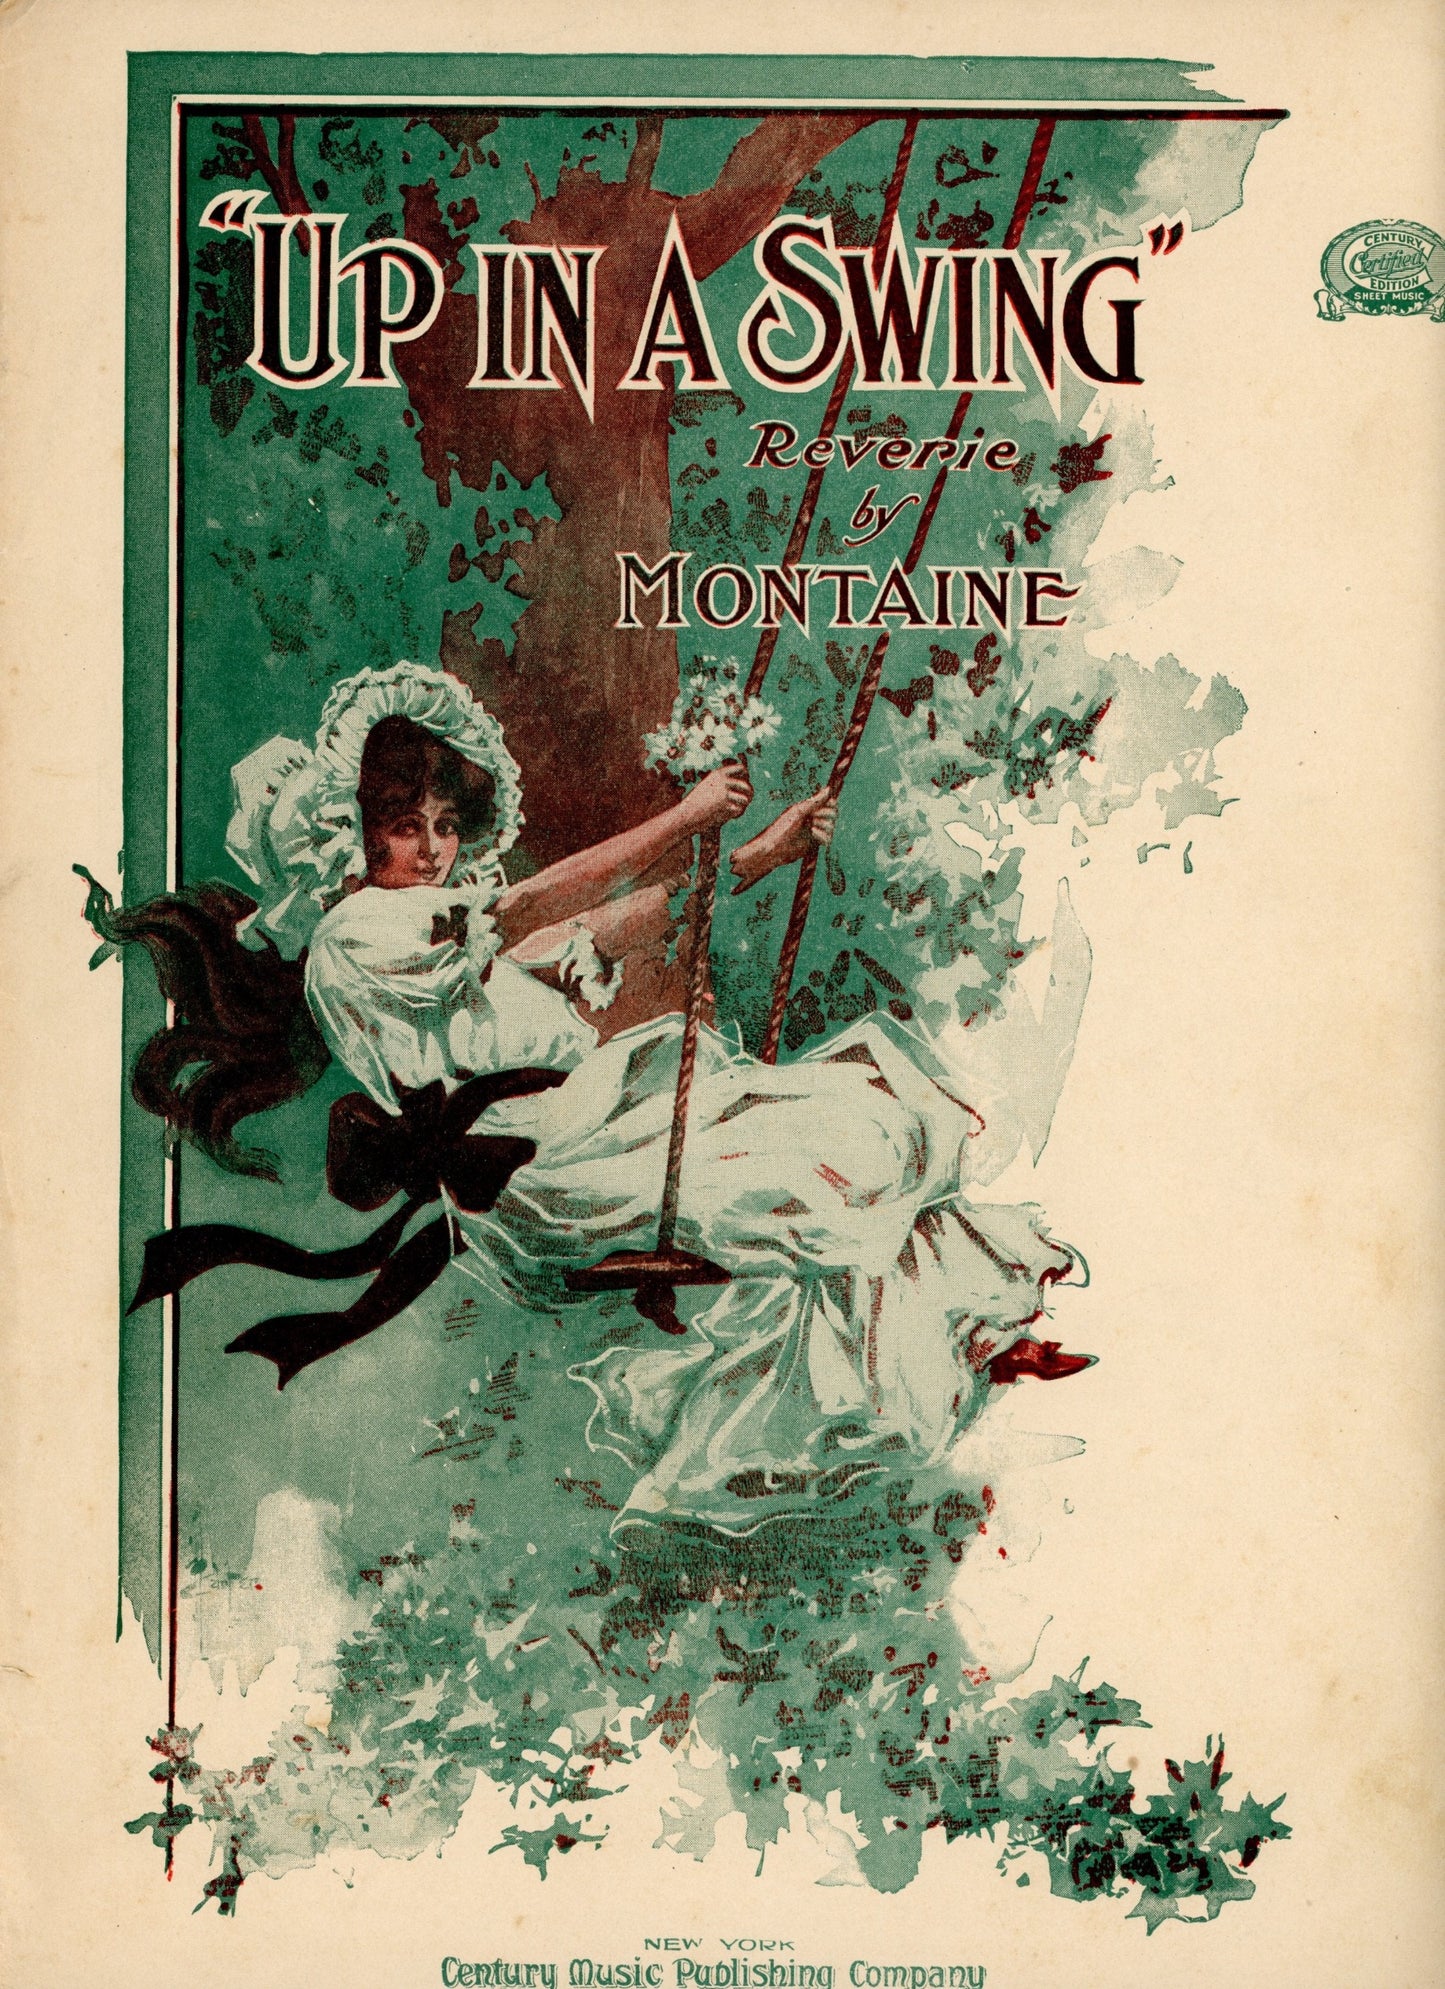 UP IN A SWING Reverie by Montaine Vintage Sheet Music ©1902